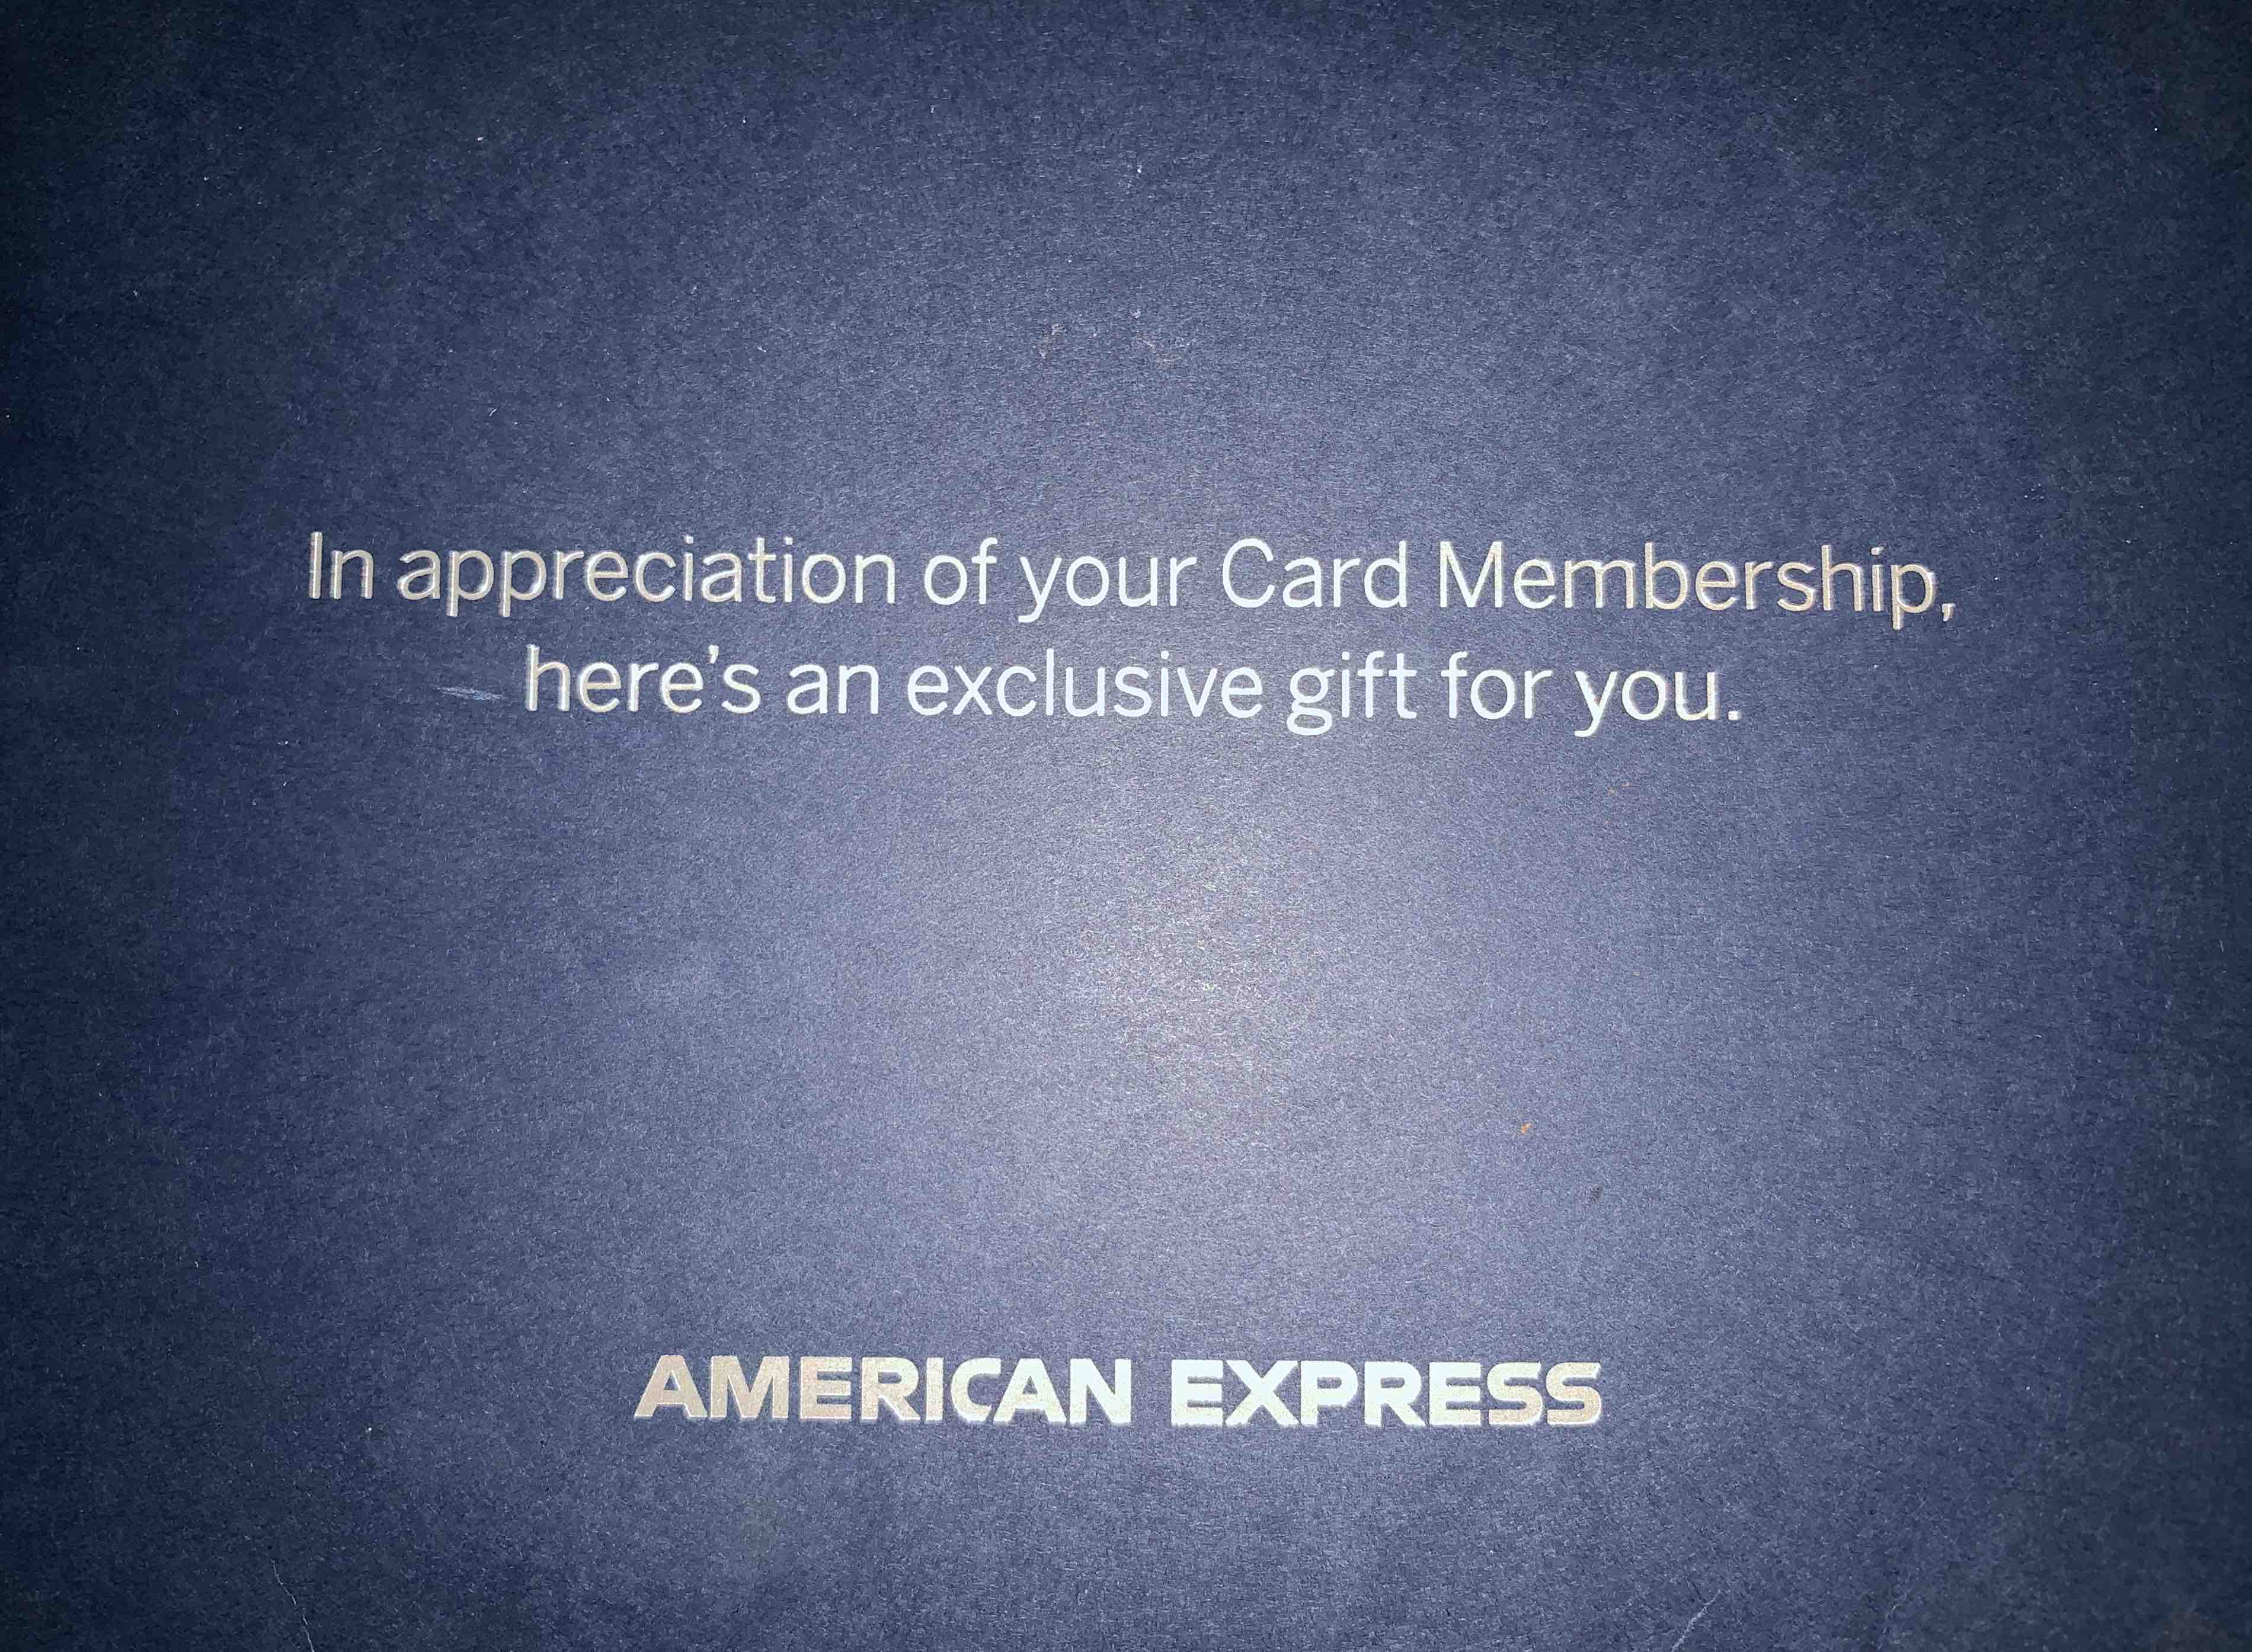 Did Anyone Else get a Gift Card from AMEX?